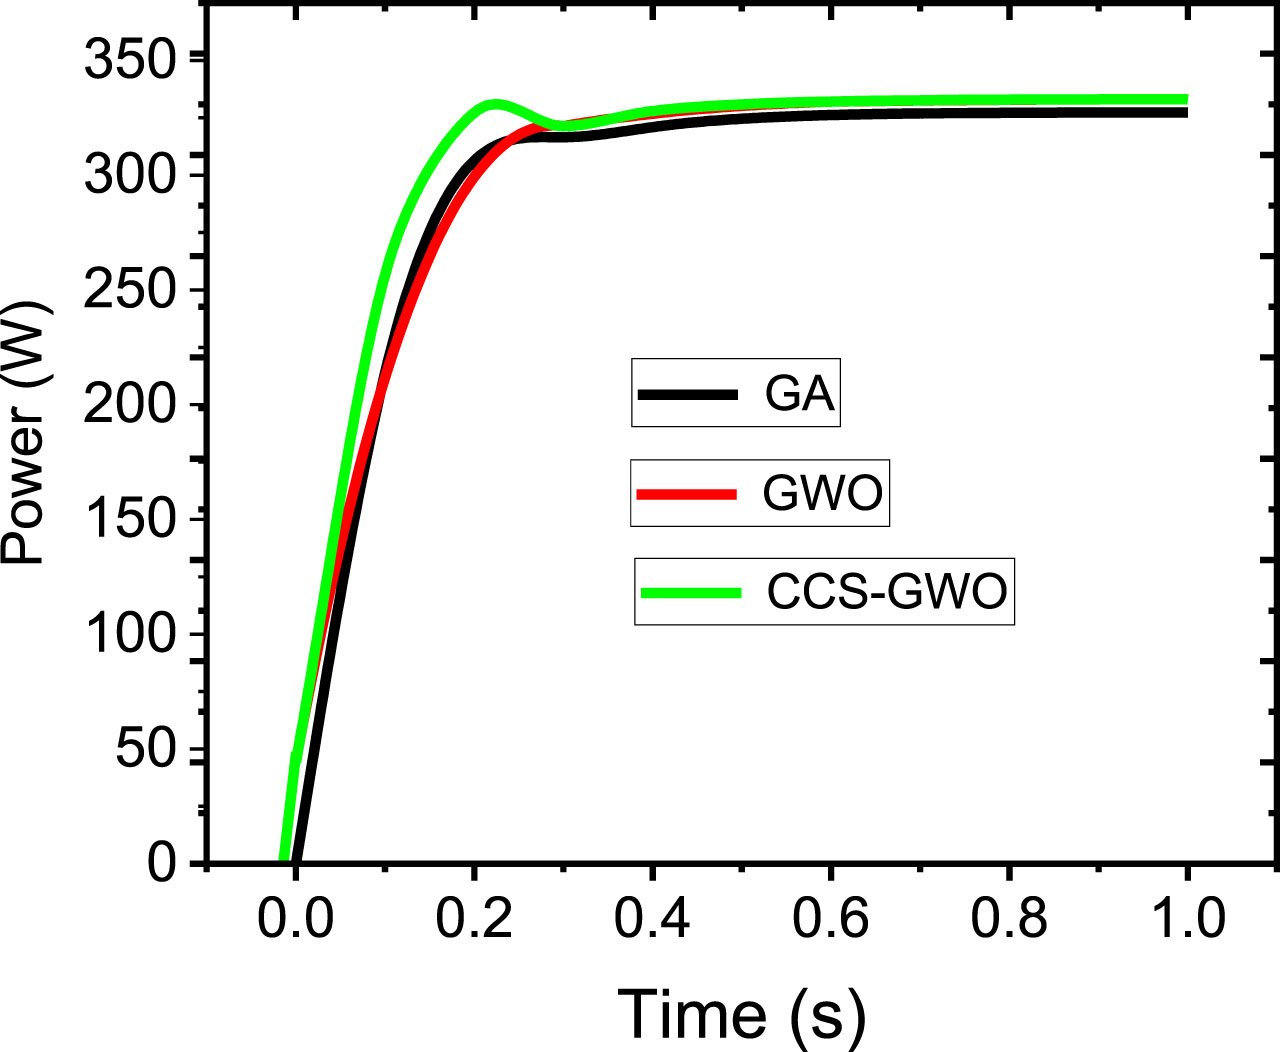 GA, GWO and CCS-GWO powers curves at STC.